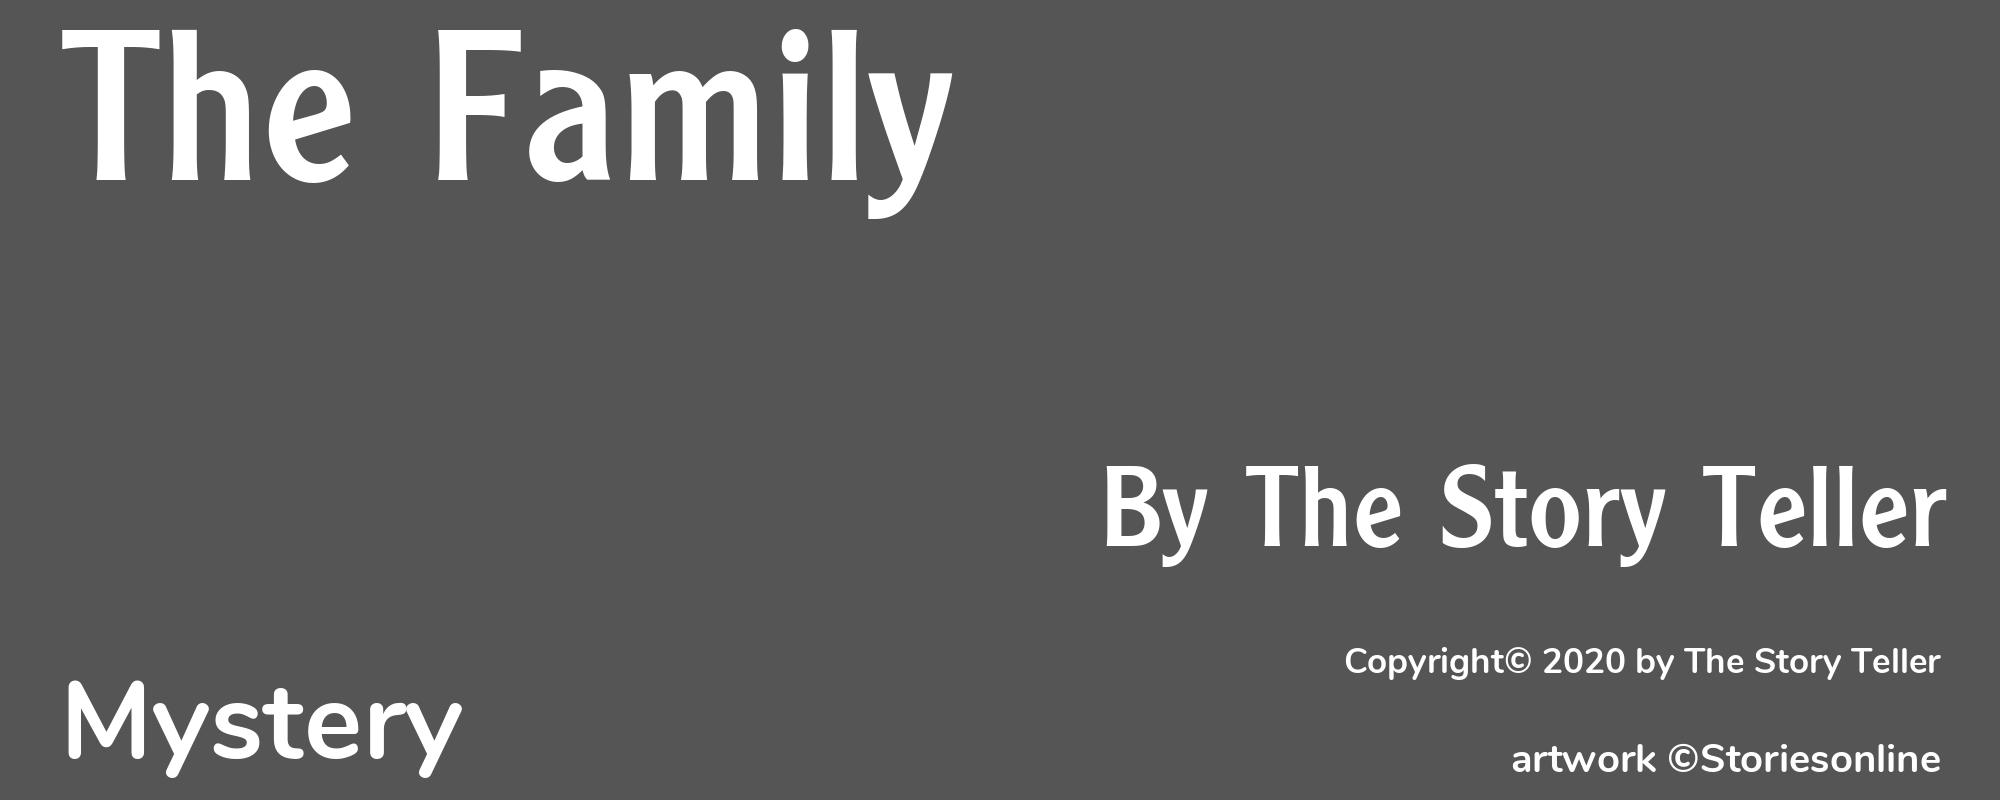 The Family - Cover